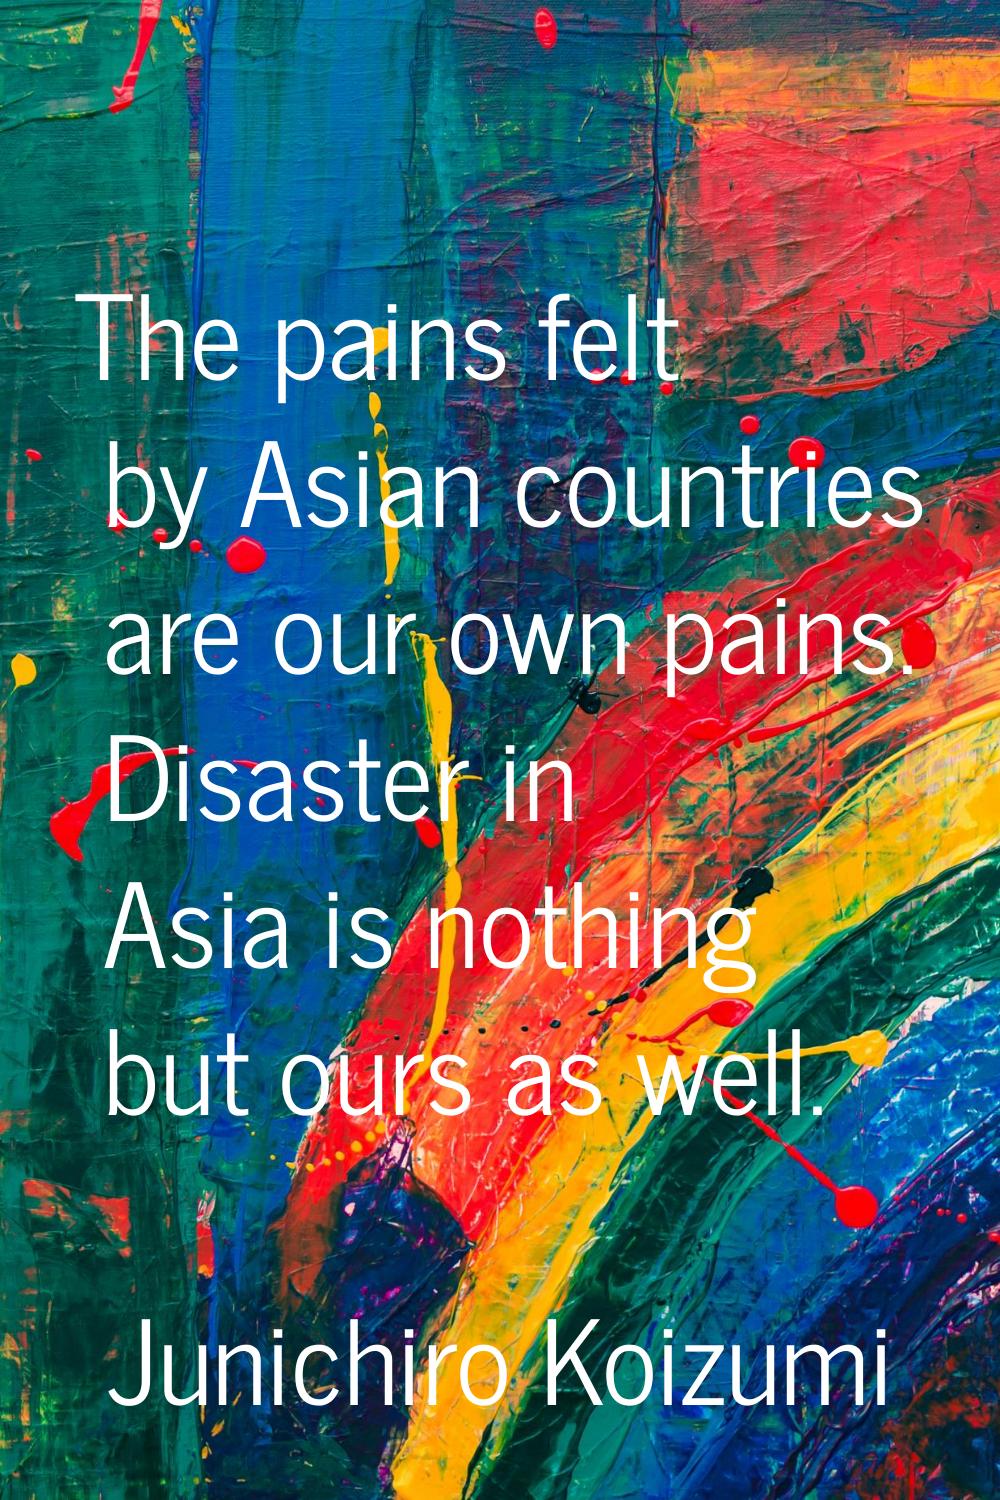 The pains felt by Asian countries are our own pains. Disaster in Asia is nothing but ours as well.